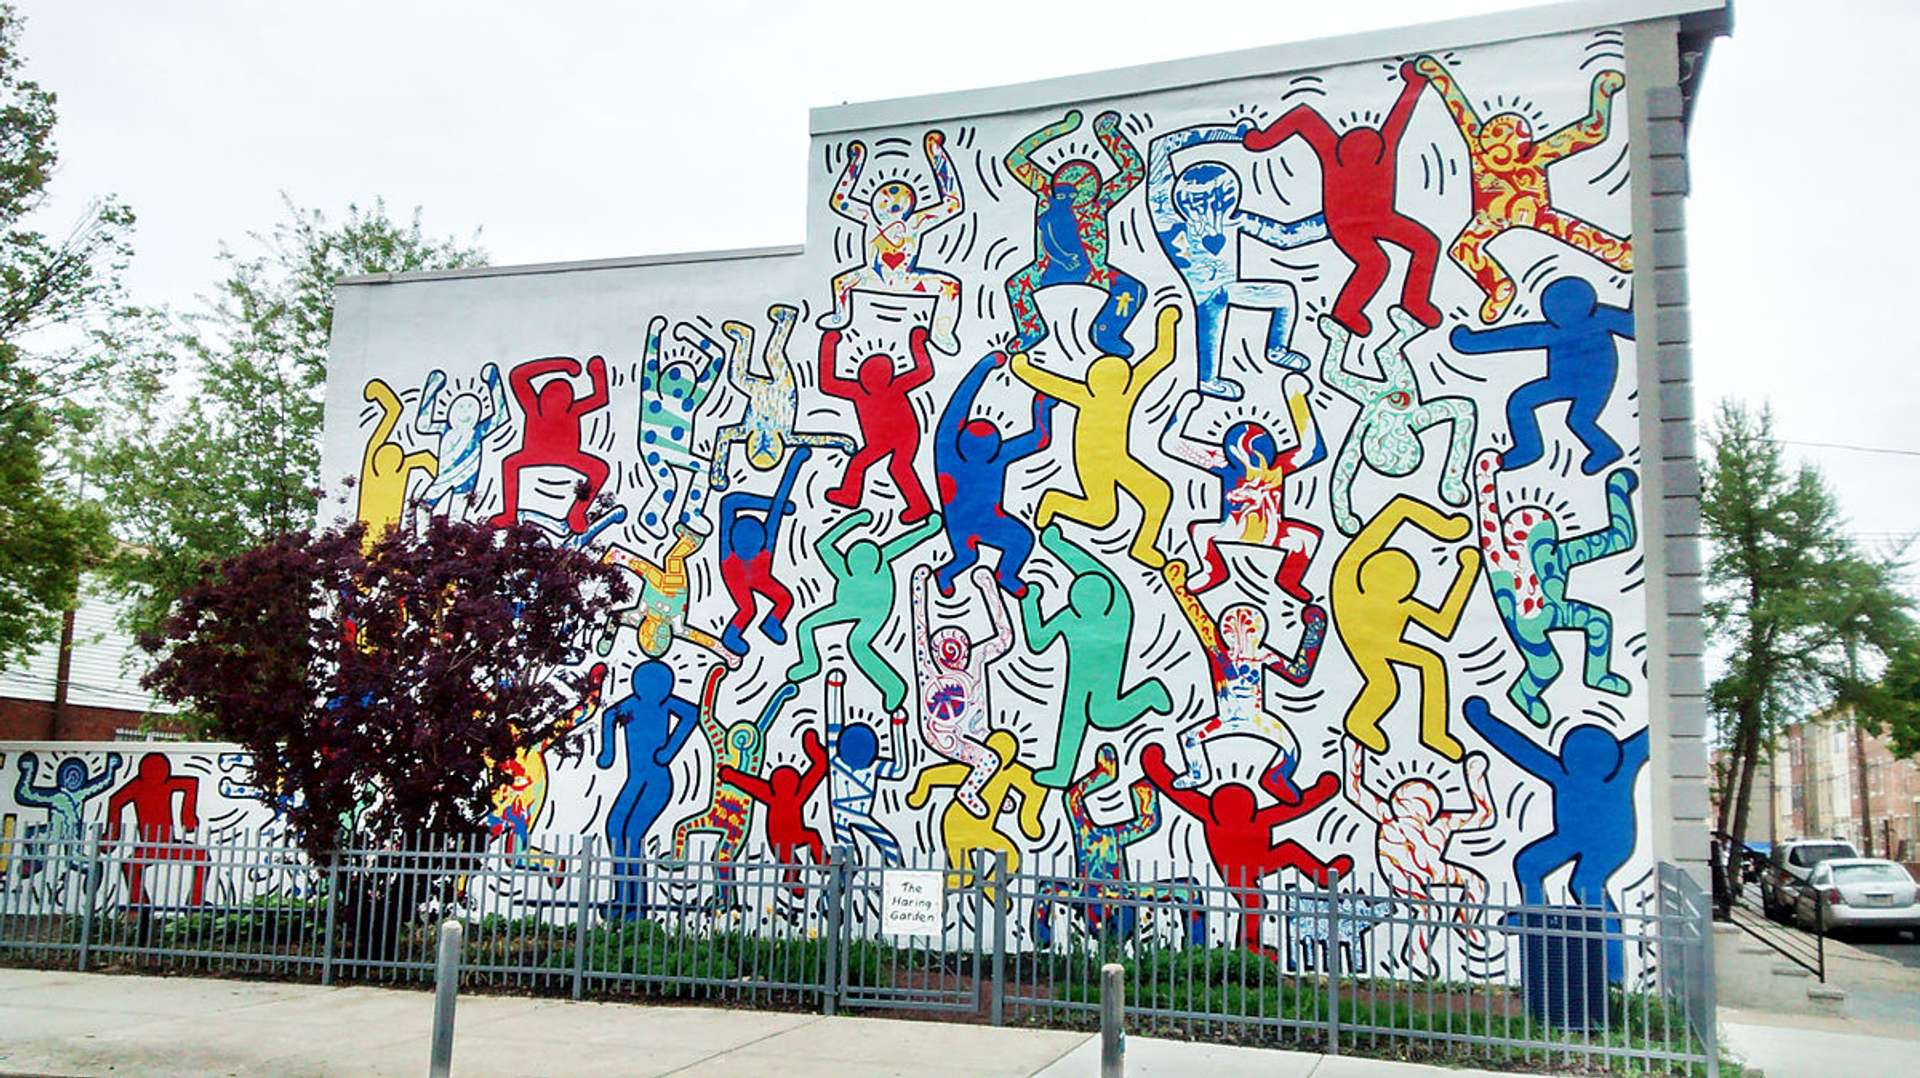 Keith Haring's Art and the Emergence of Street Art in the 1980s